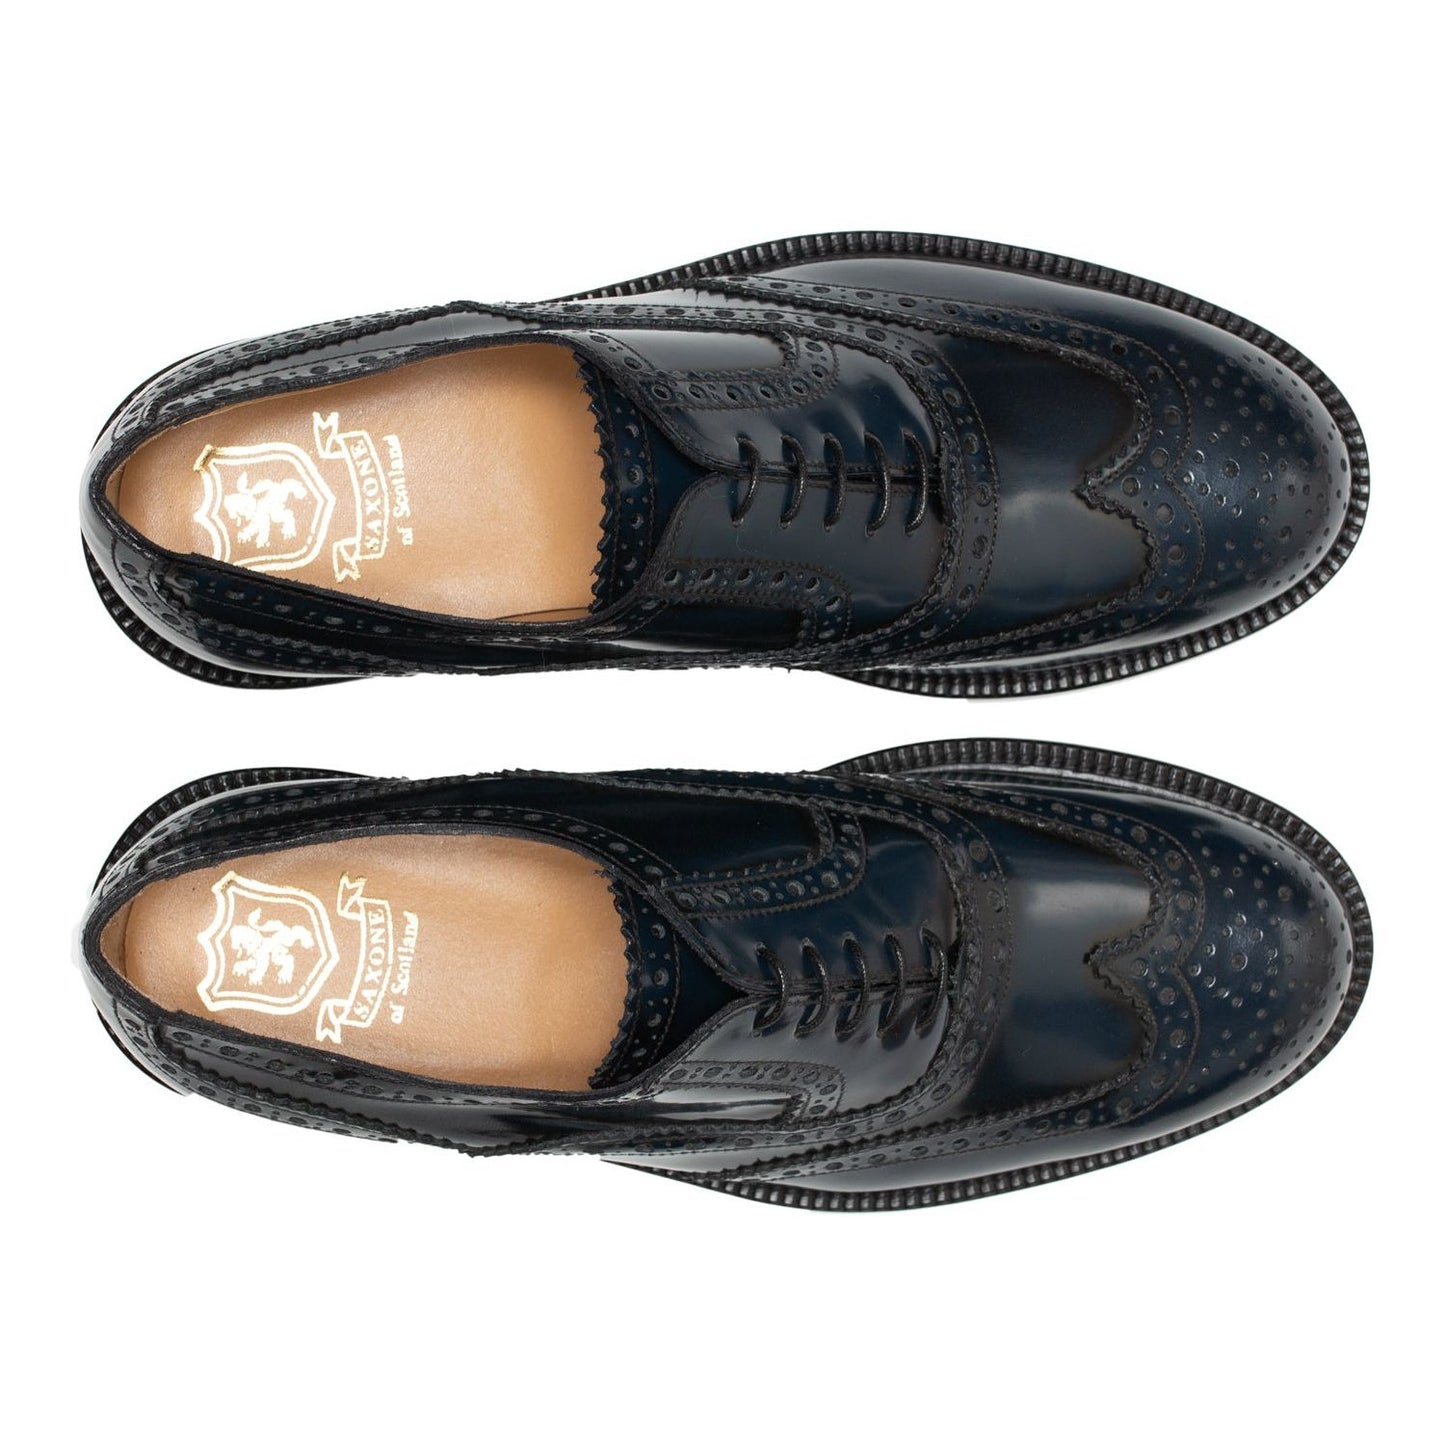 Saxone of Scotland Elegant Blue Leather Brogue Shoes blue-spazzolato-leather-mens-laced-full-brogue-shoes